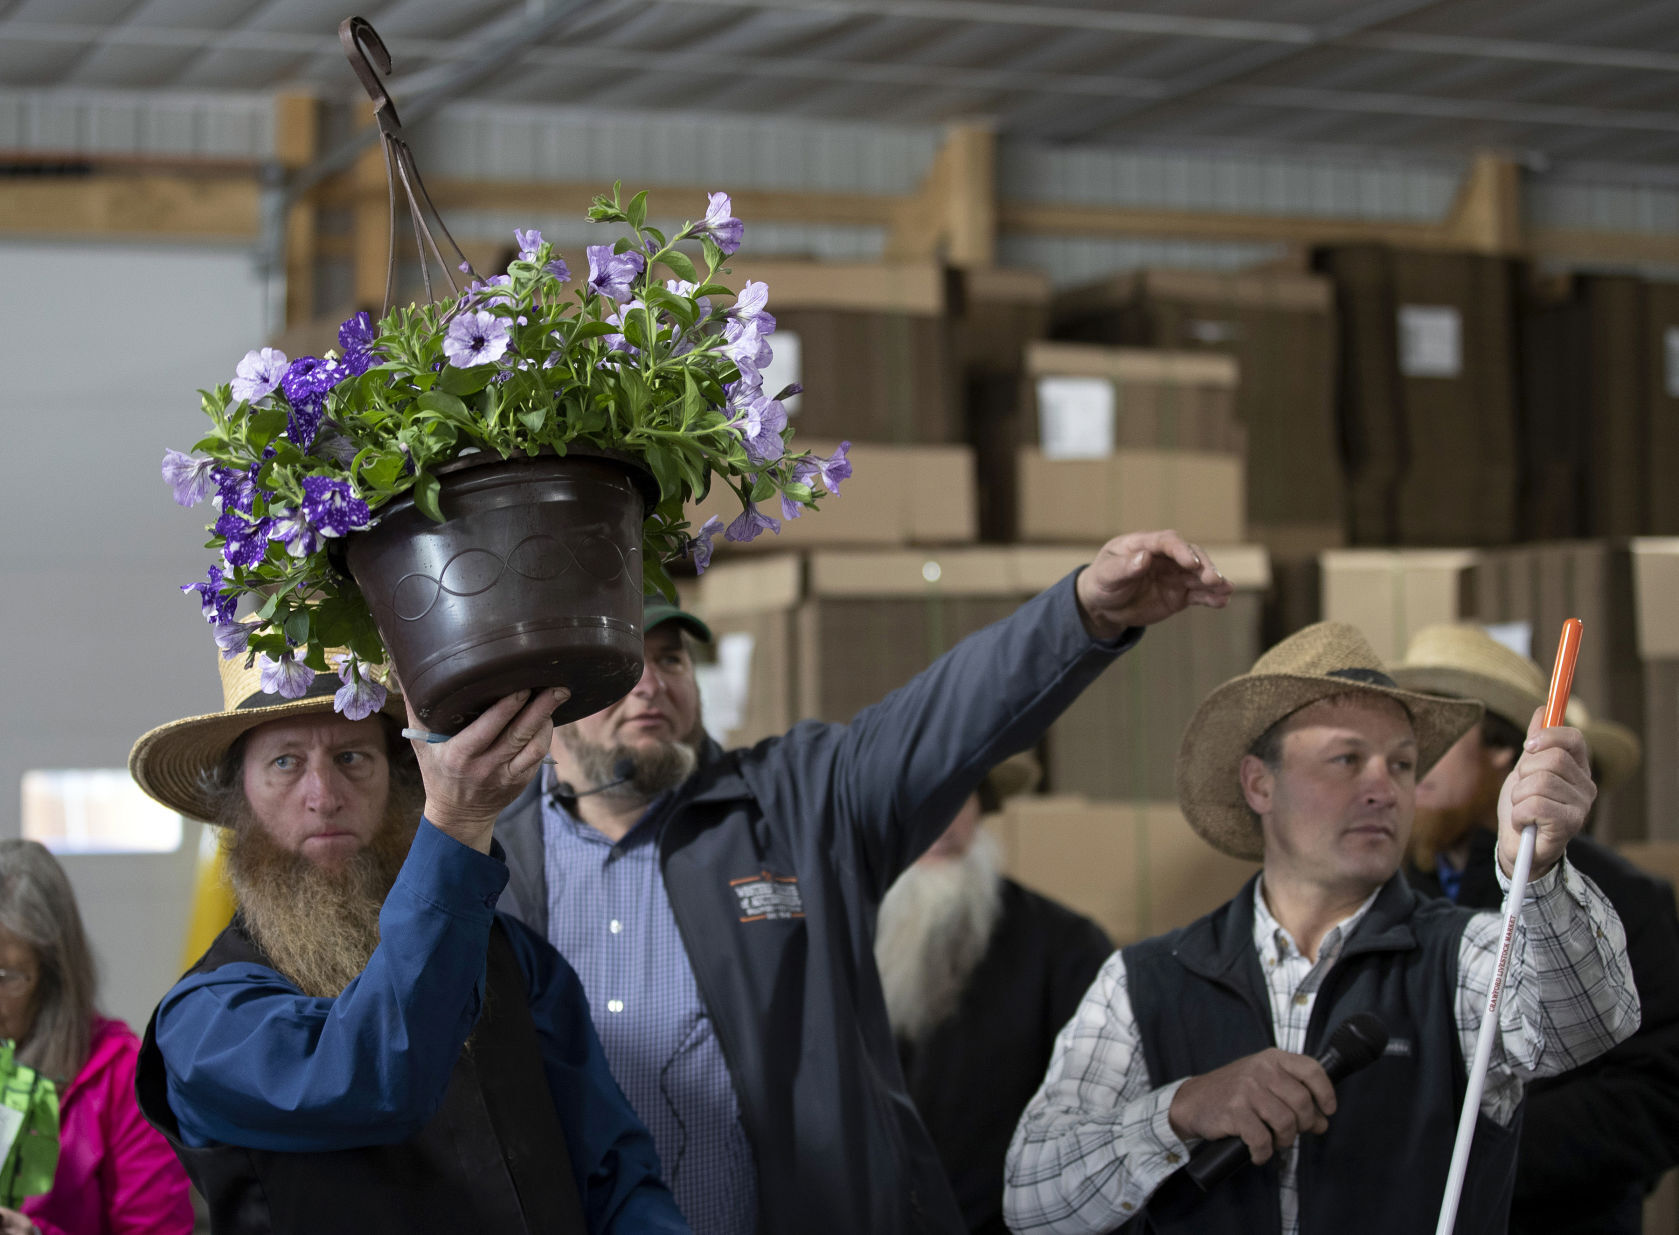 Amos Beiler holds up a basket of flowers as auctioneer Eugene Hostetler and manager Kevin Hall watch for bids at Platteville (Wis.) Produce Auction on Friday. PHOTO CREDIT: Stephen Gassman